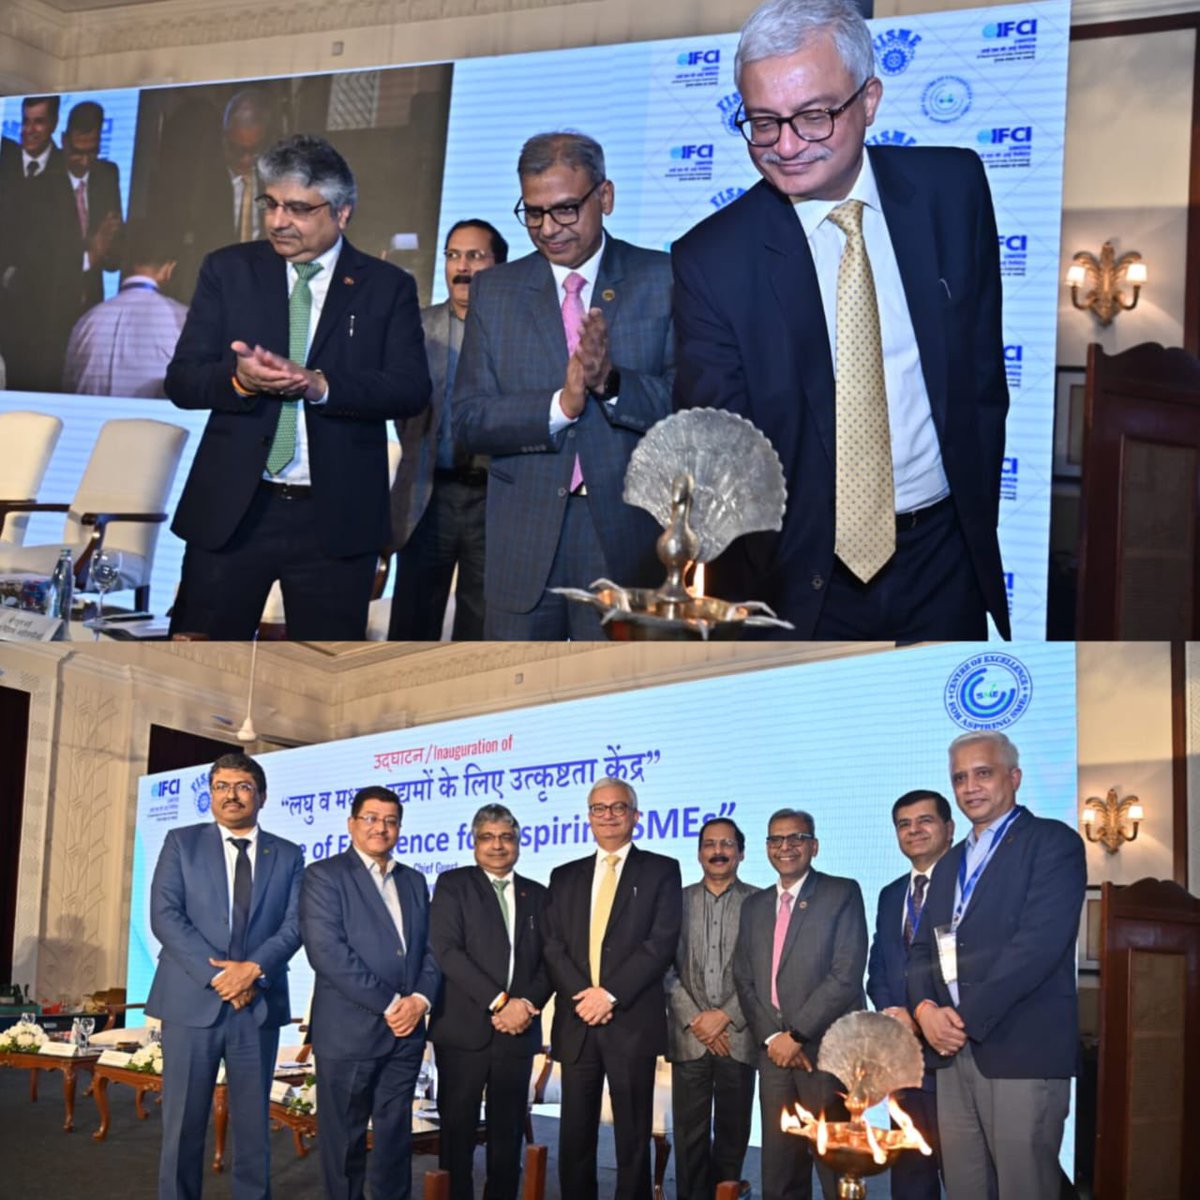 Dr Vivek Joshi, Secretary, DFS today inaugurated the 'Centre of Excellence for Aspiring SMEs’ – an IFCI FISME collaboration. The centre would support growth of SMEs and handhold them to overcome challenges in accessing capital markets and forging JVs with foreign companies.